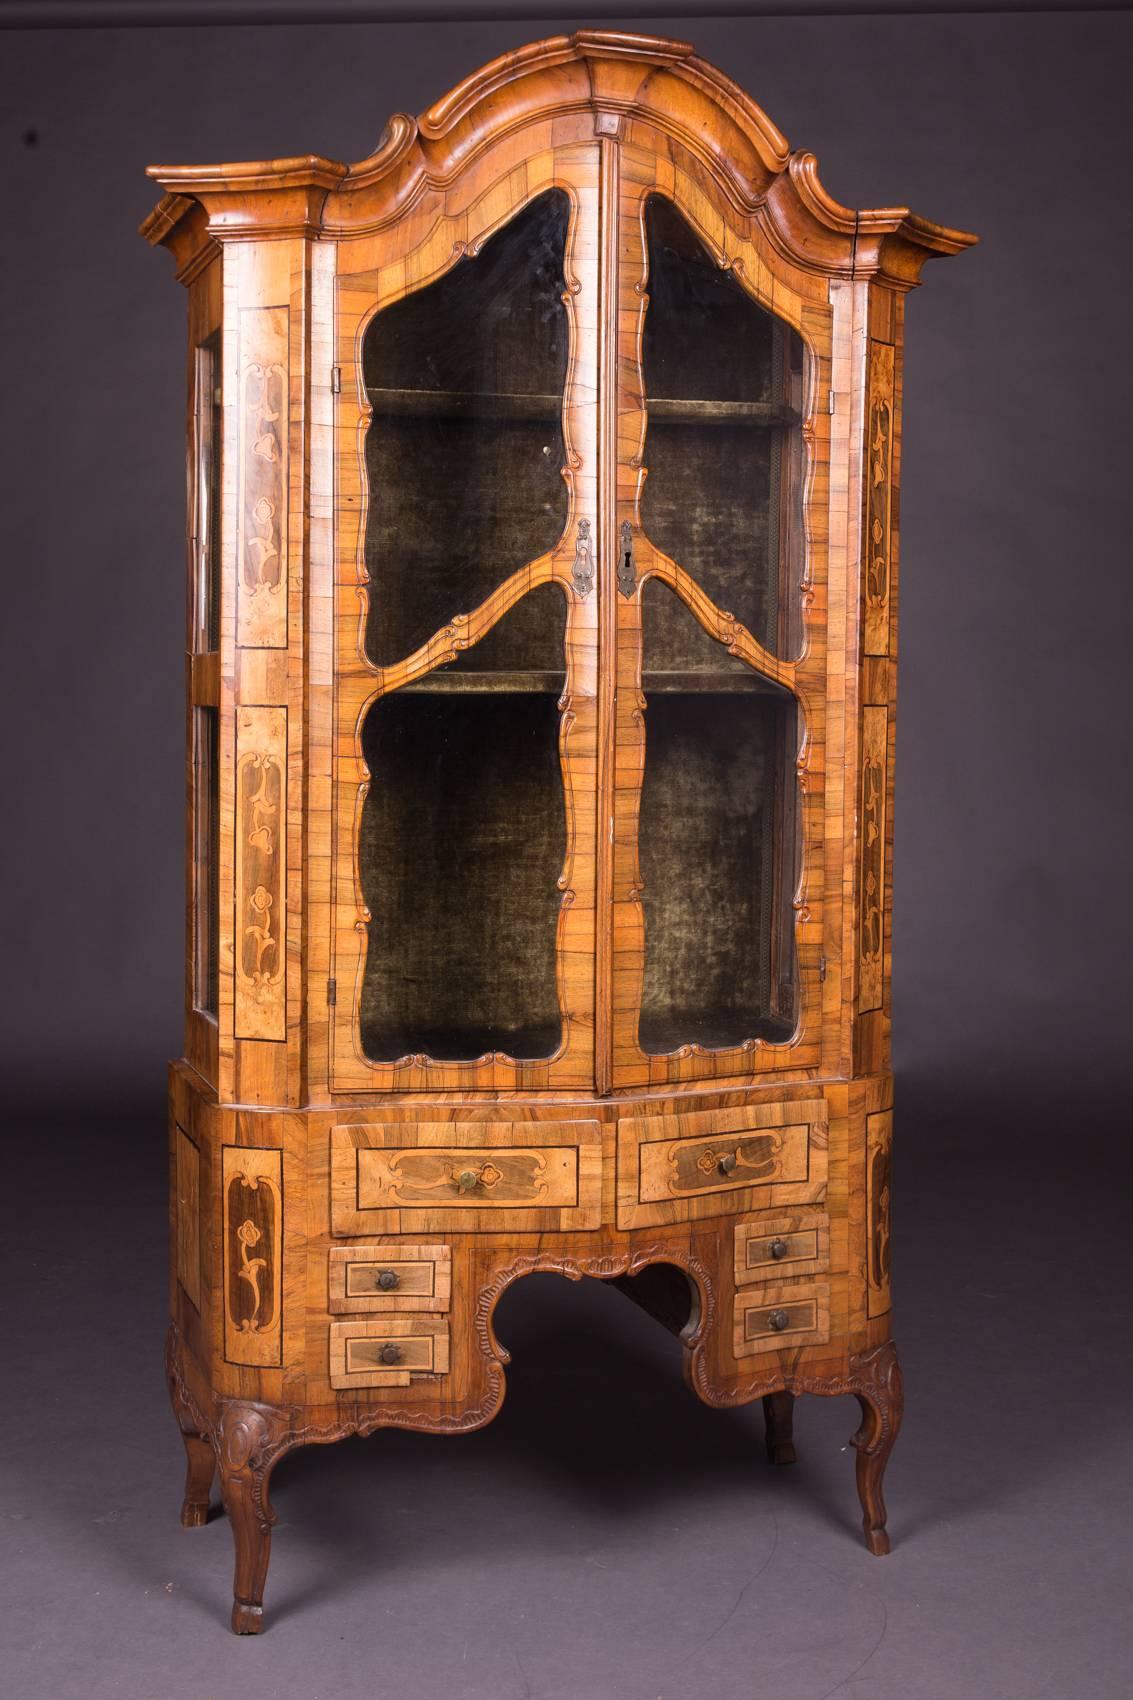 Baroque cabinet, 18th century walnut and other precious wood veneered and inlaid, standing on small legs, strongly curved body with six drawers, two-door, glazed glass cabinet with bent head. Partially. Floral inlaid framed veneer panels. Inside